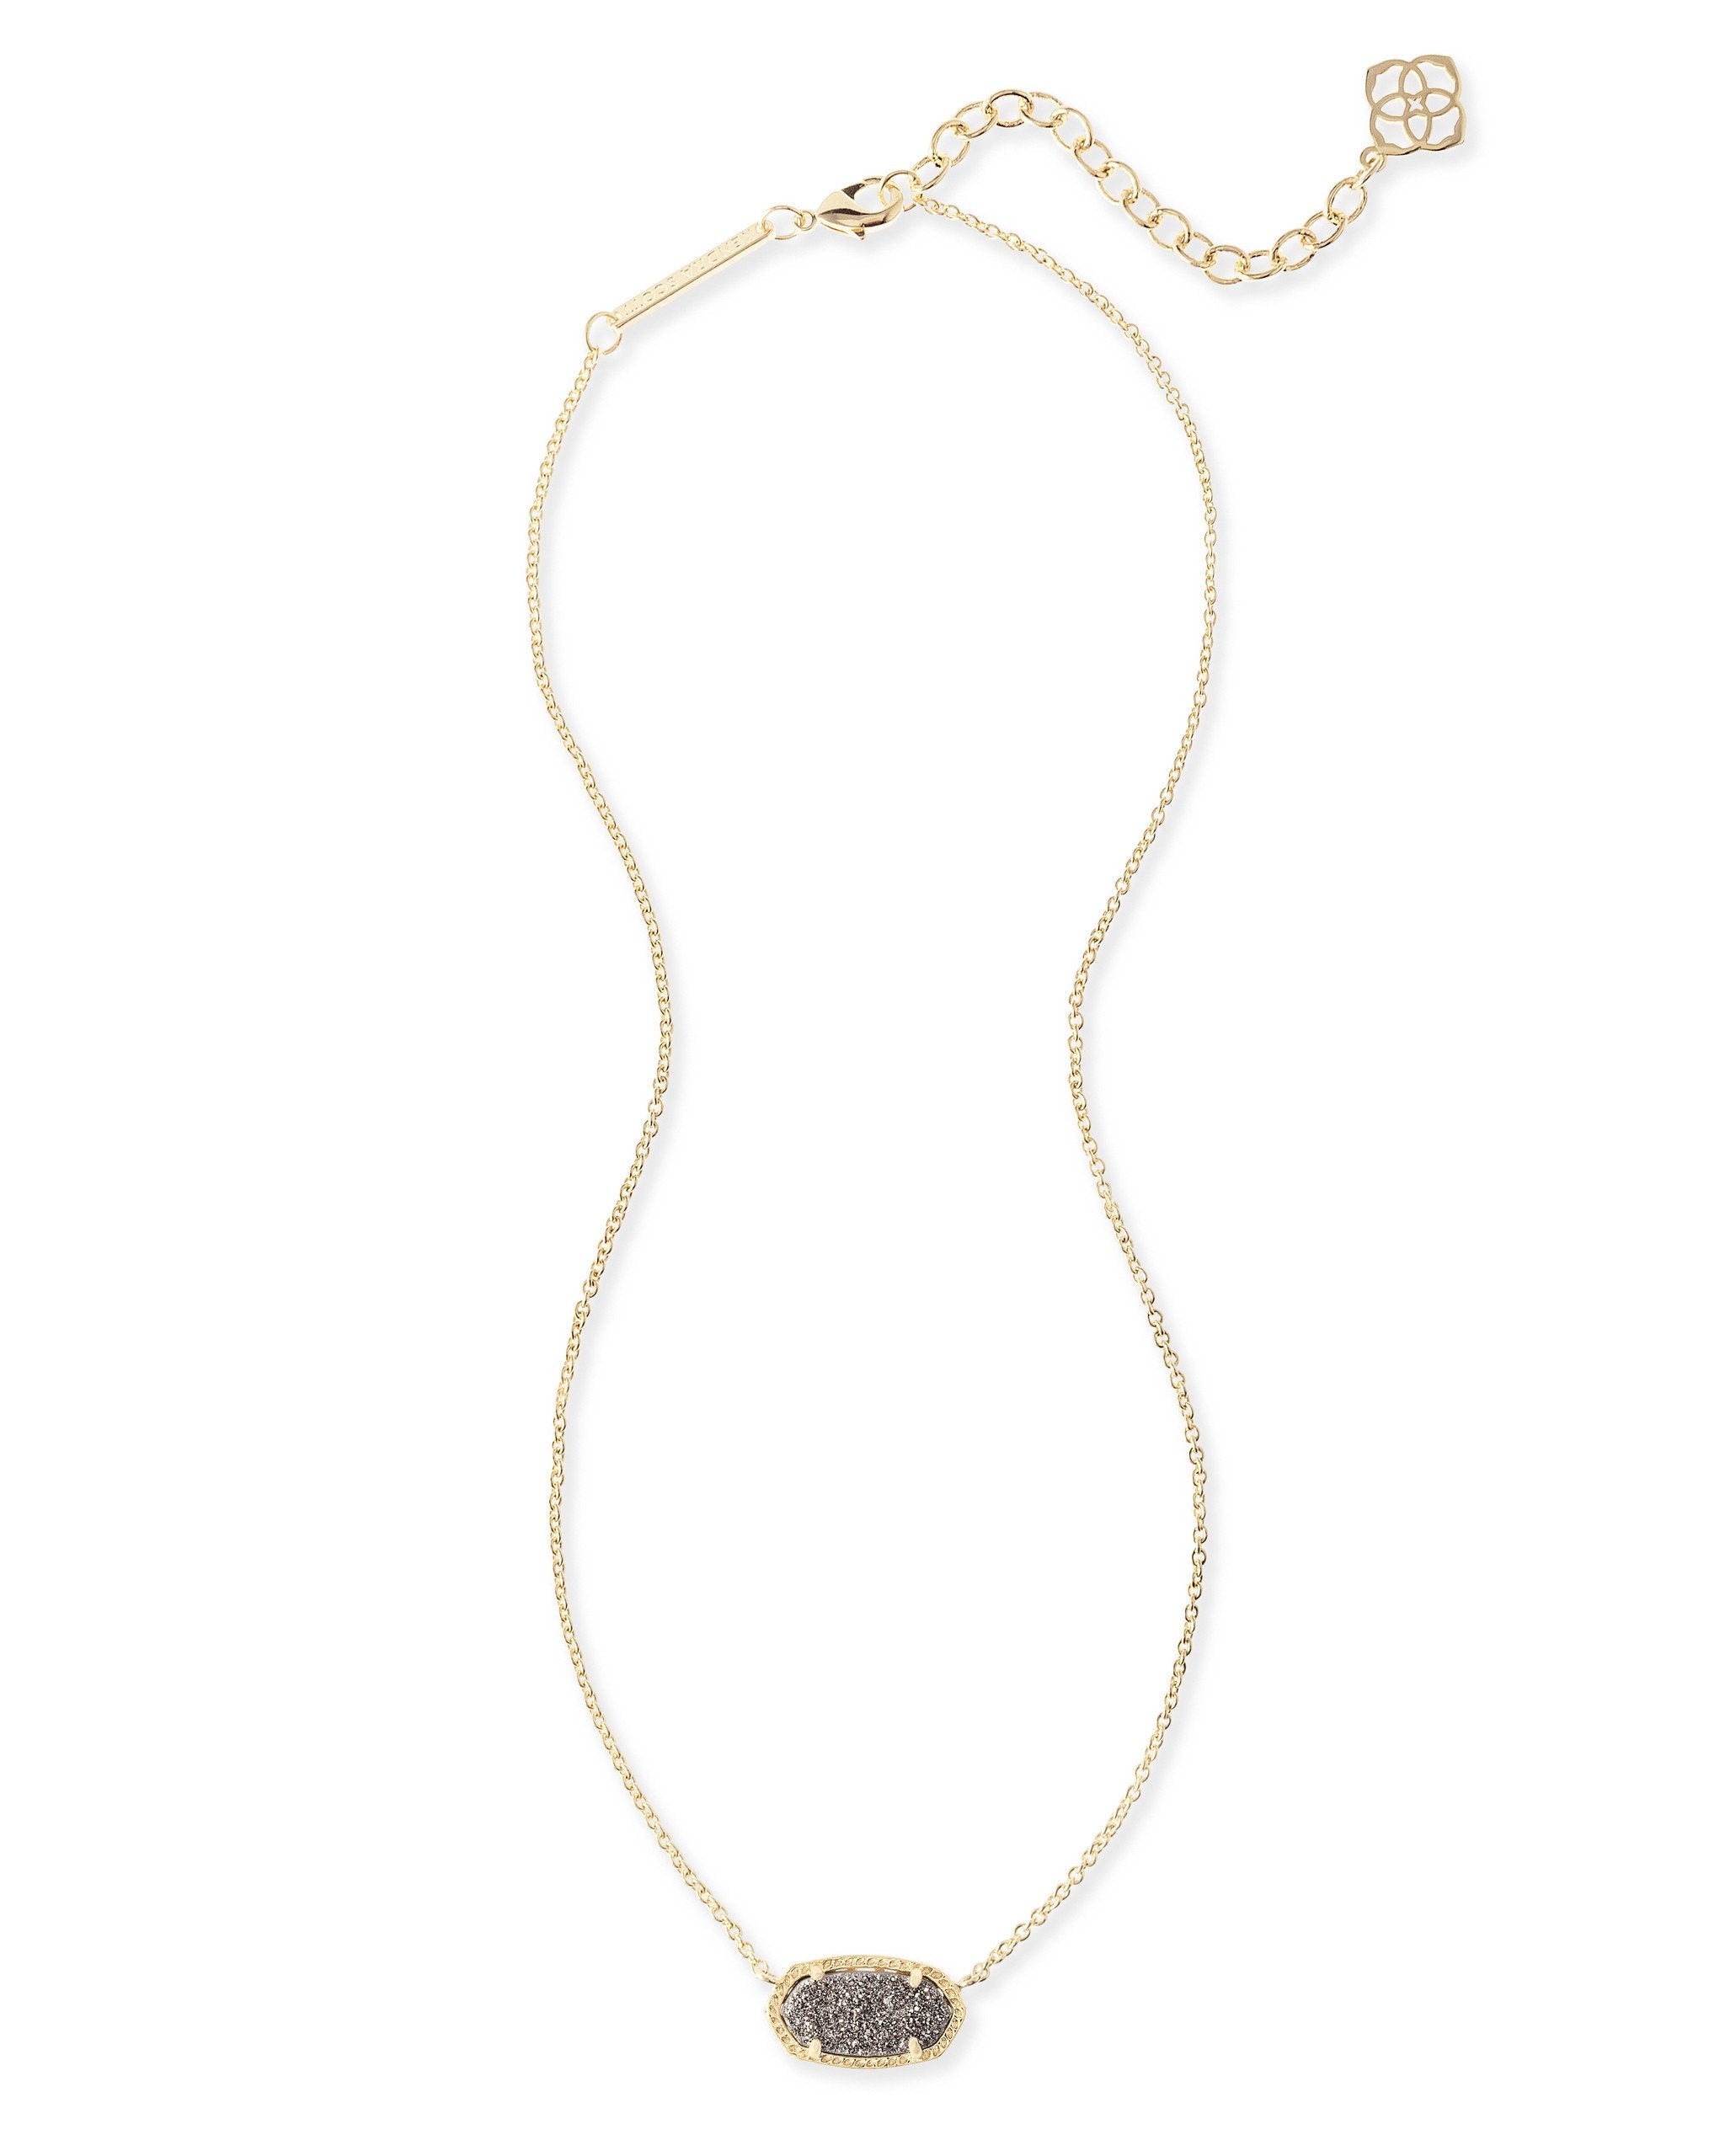 Full View of Kendra Scott Elisa Oval Pendant Necklace in Platinum Drusy and Gold Plated